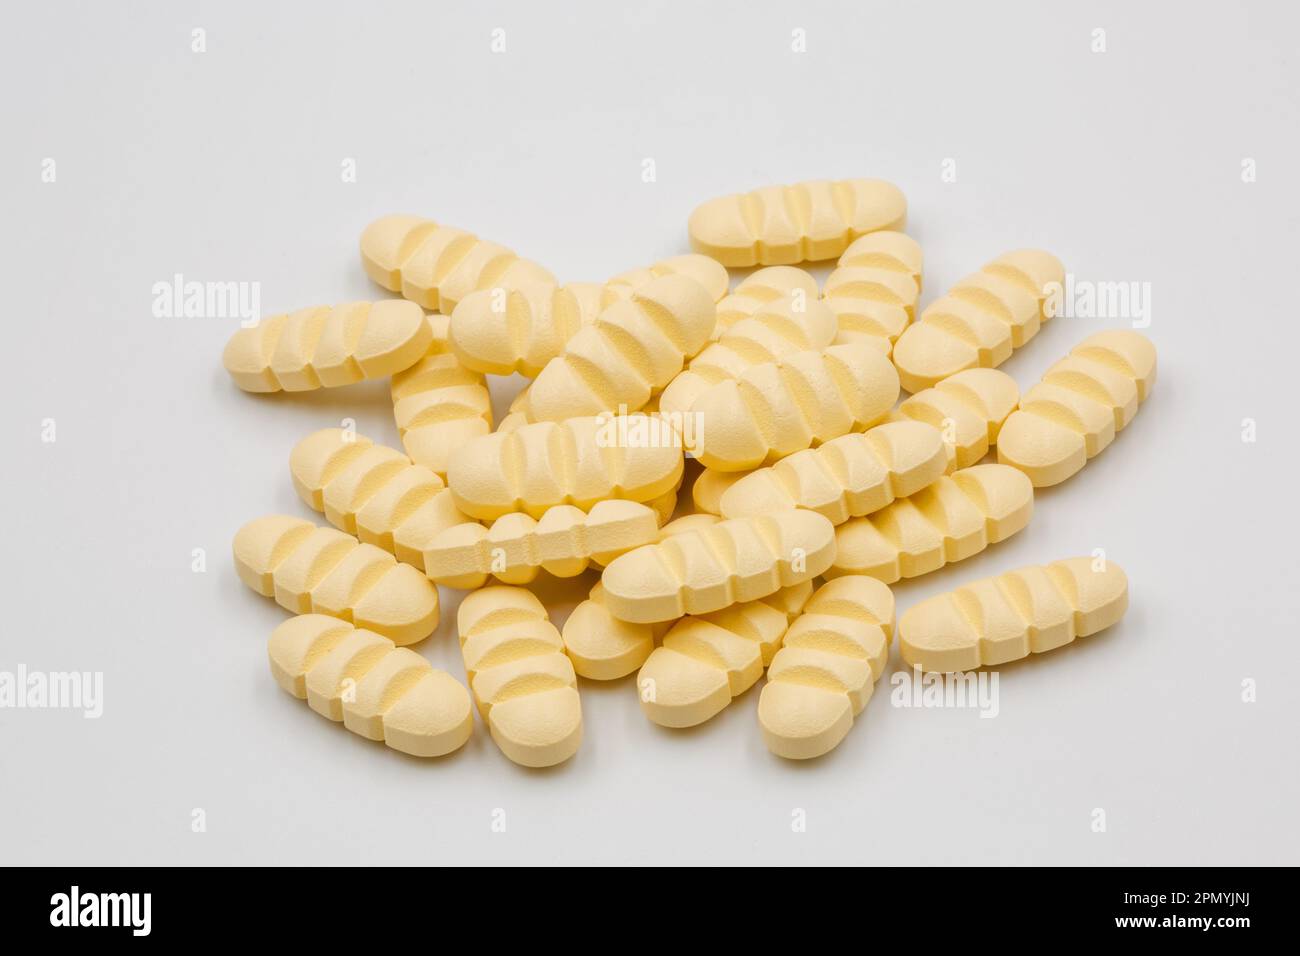 A pile of yellow oblong tablets with dividing strips for dividing into four parts closeup on white. Stock Photo